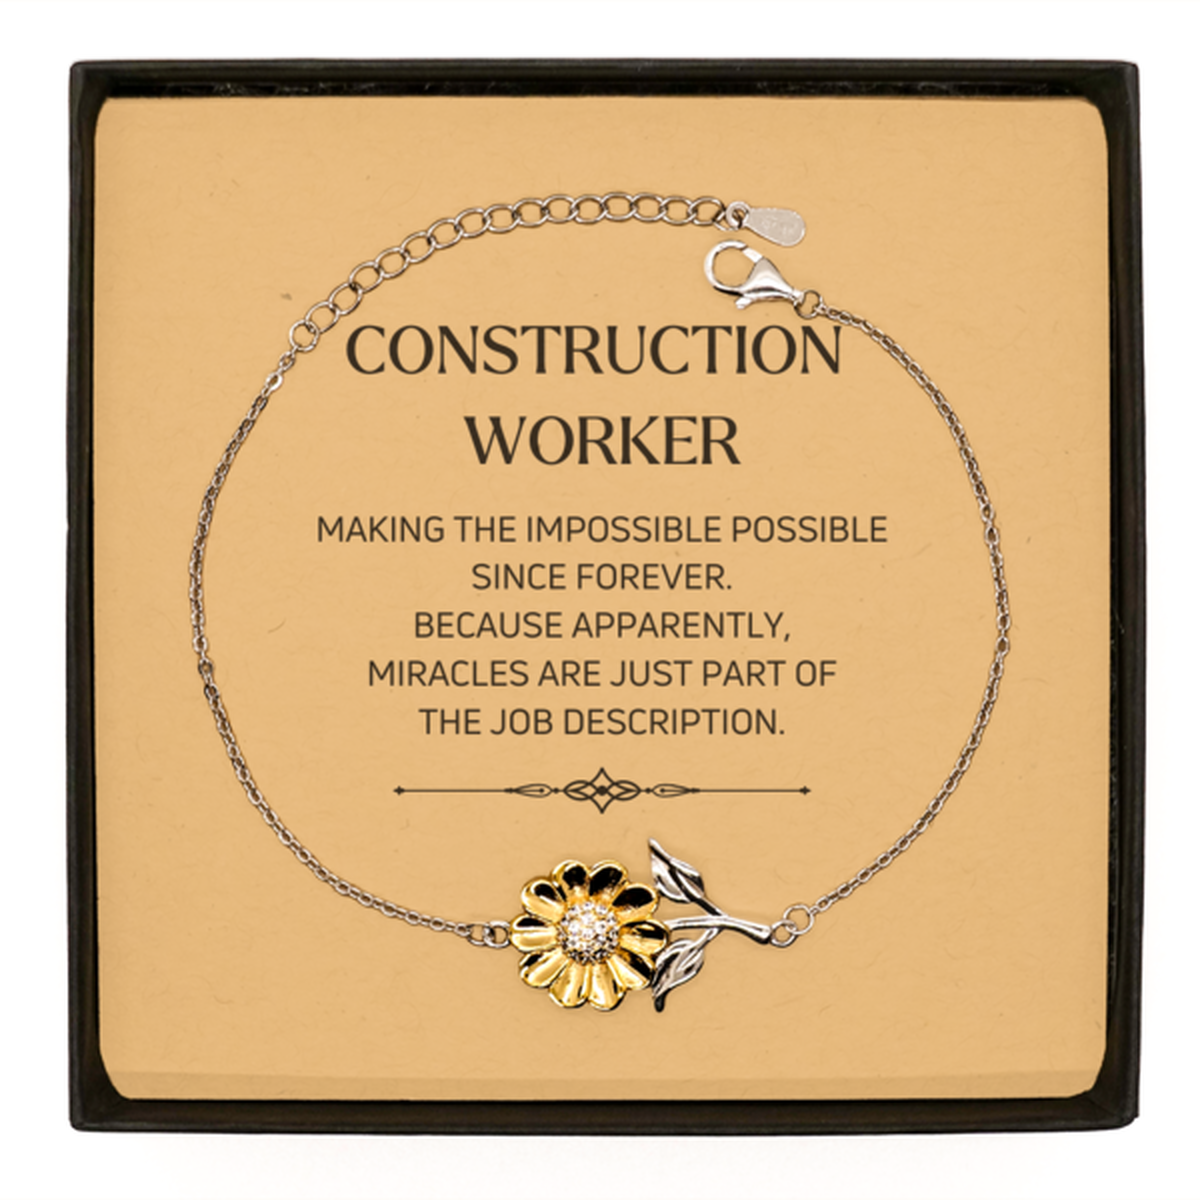 Funny Construction Worker Gifts, Miracles are just part of the job description, Inspirational Birthday Sunflower Bracelet For Construction Worker, Men, Women, Coworkers, Friends, Boss